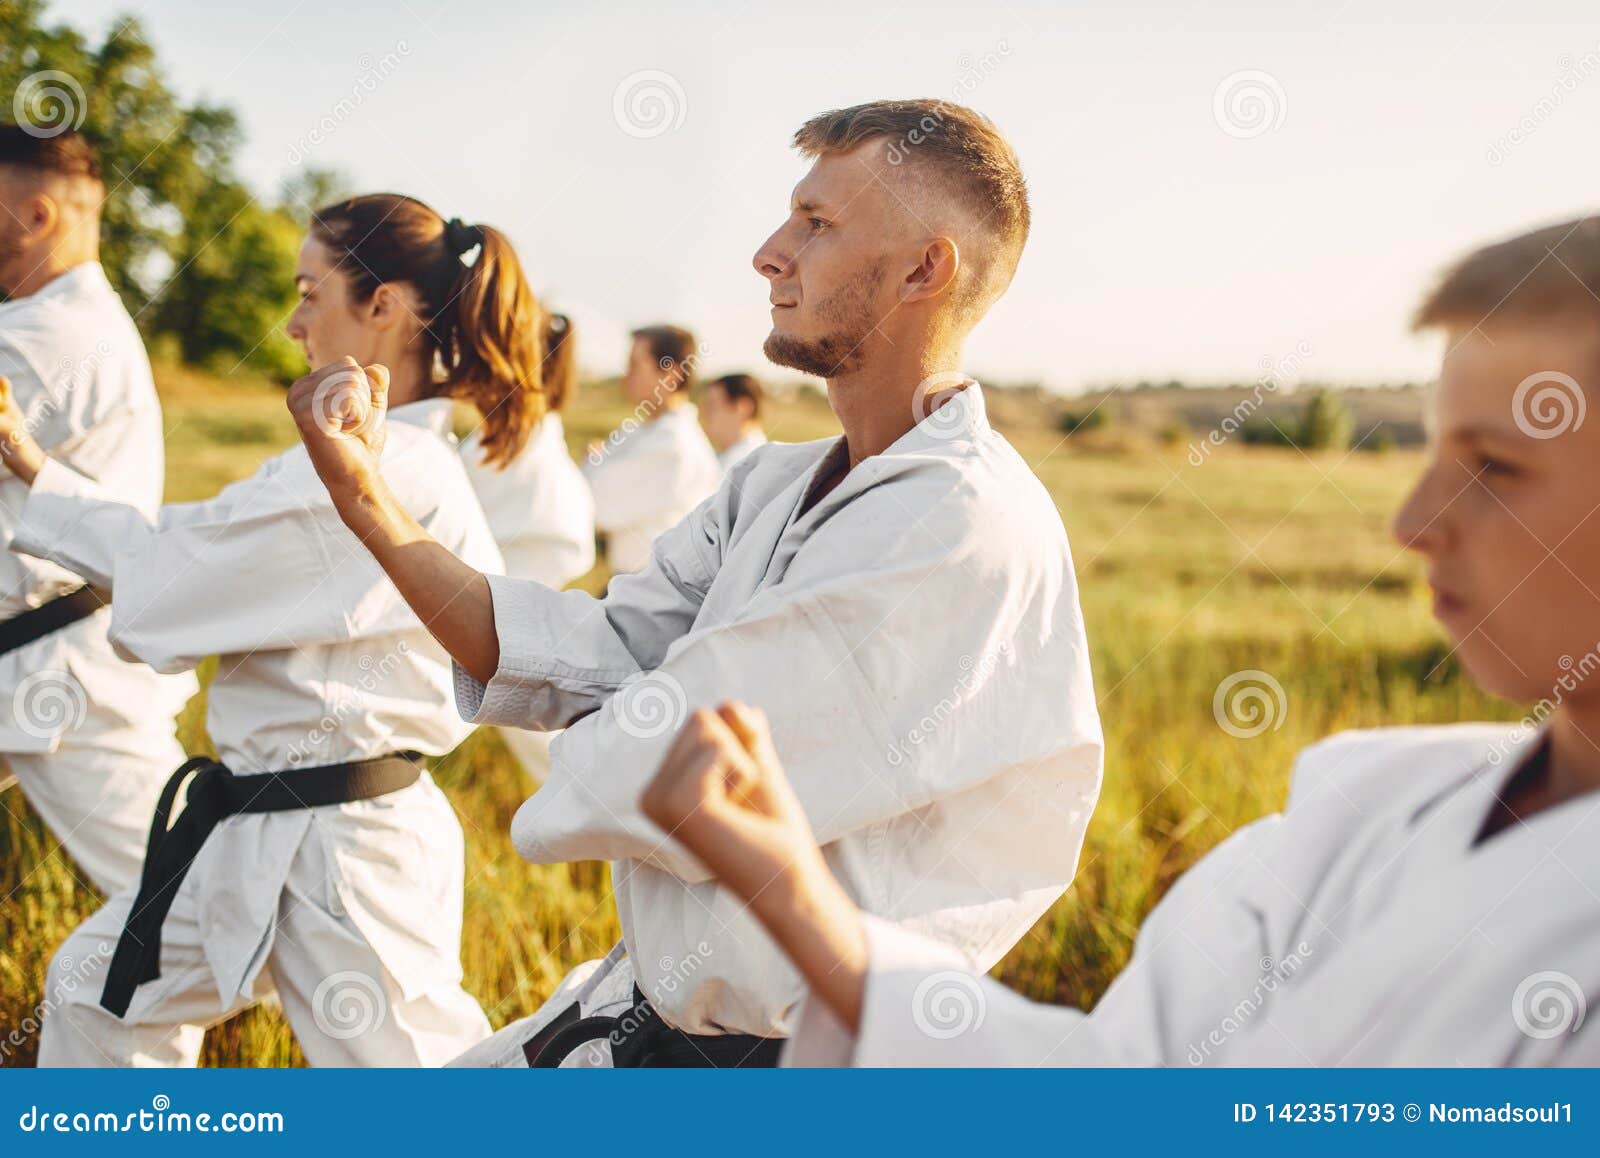 Karate Group on Training in Summer Field Stock Image - Image of adult